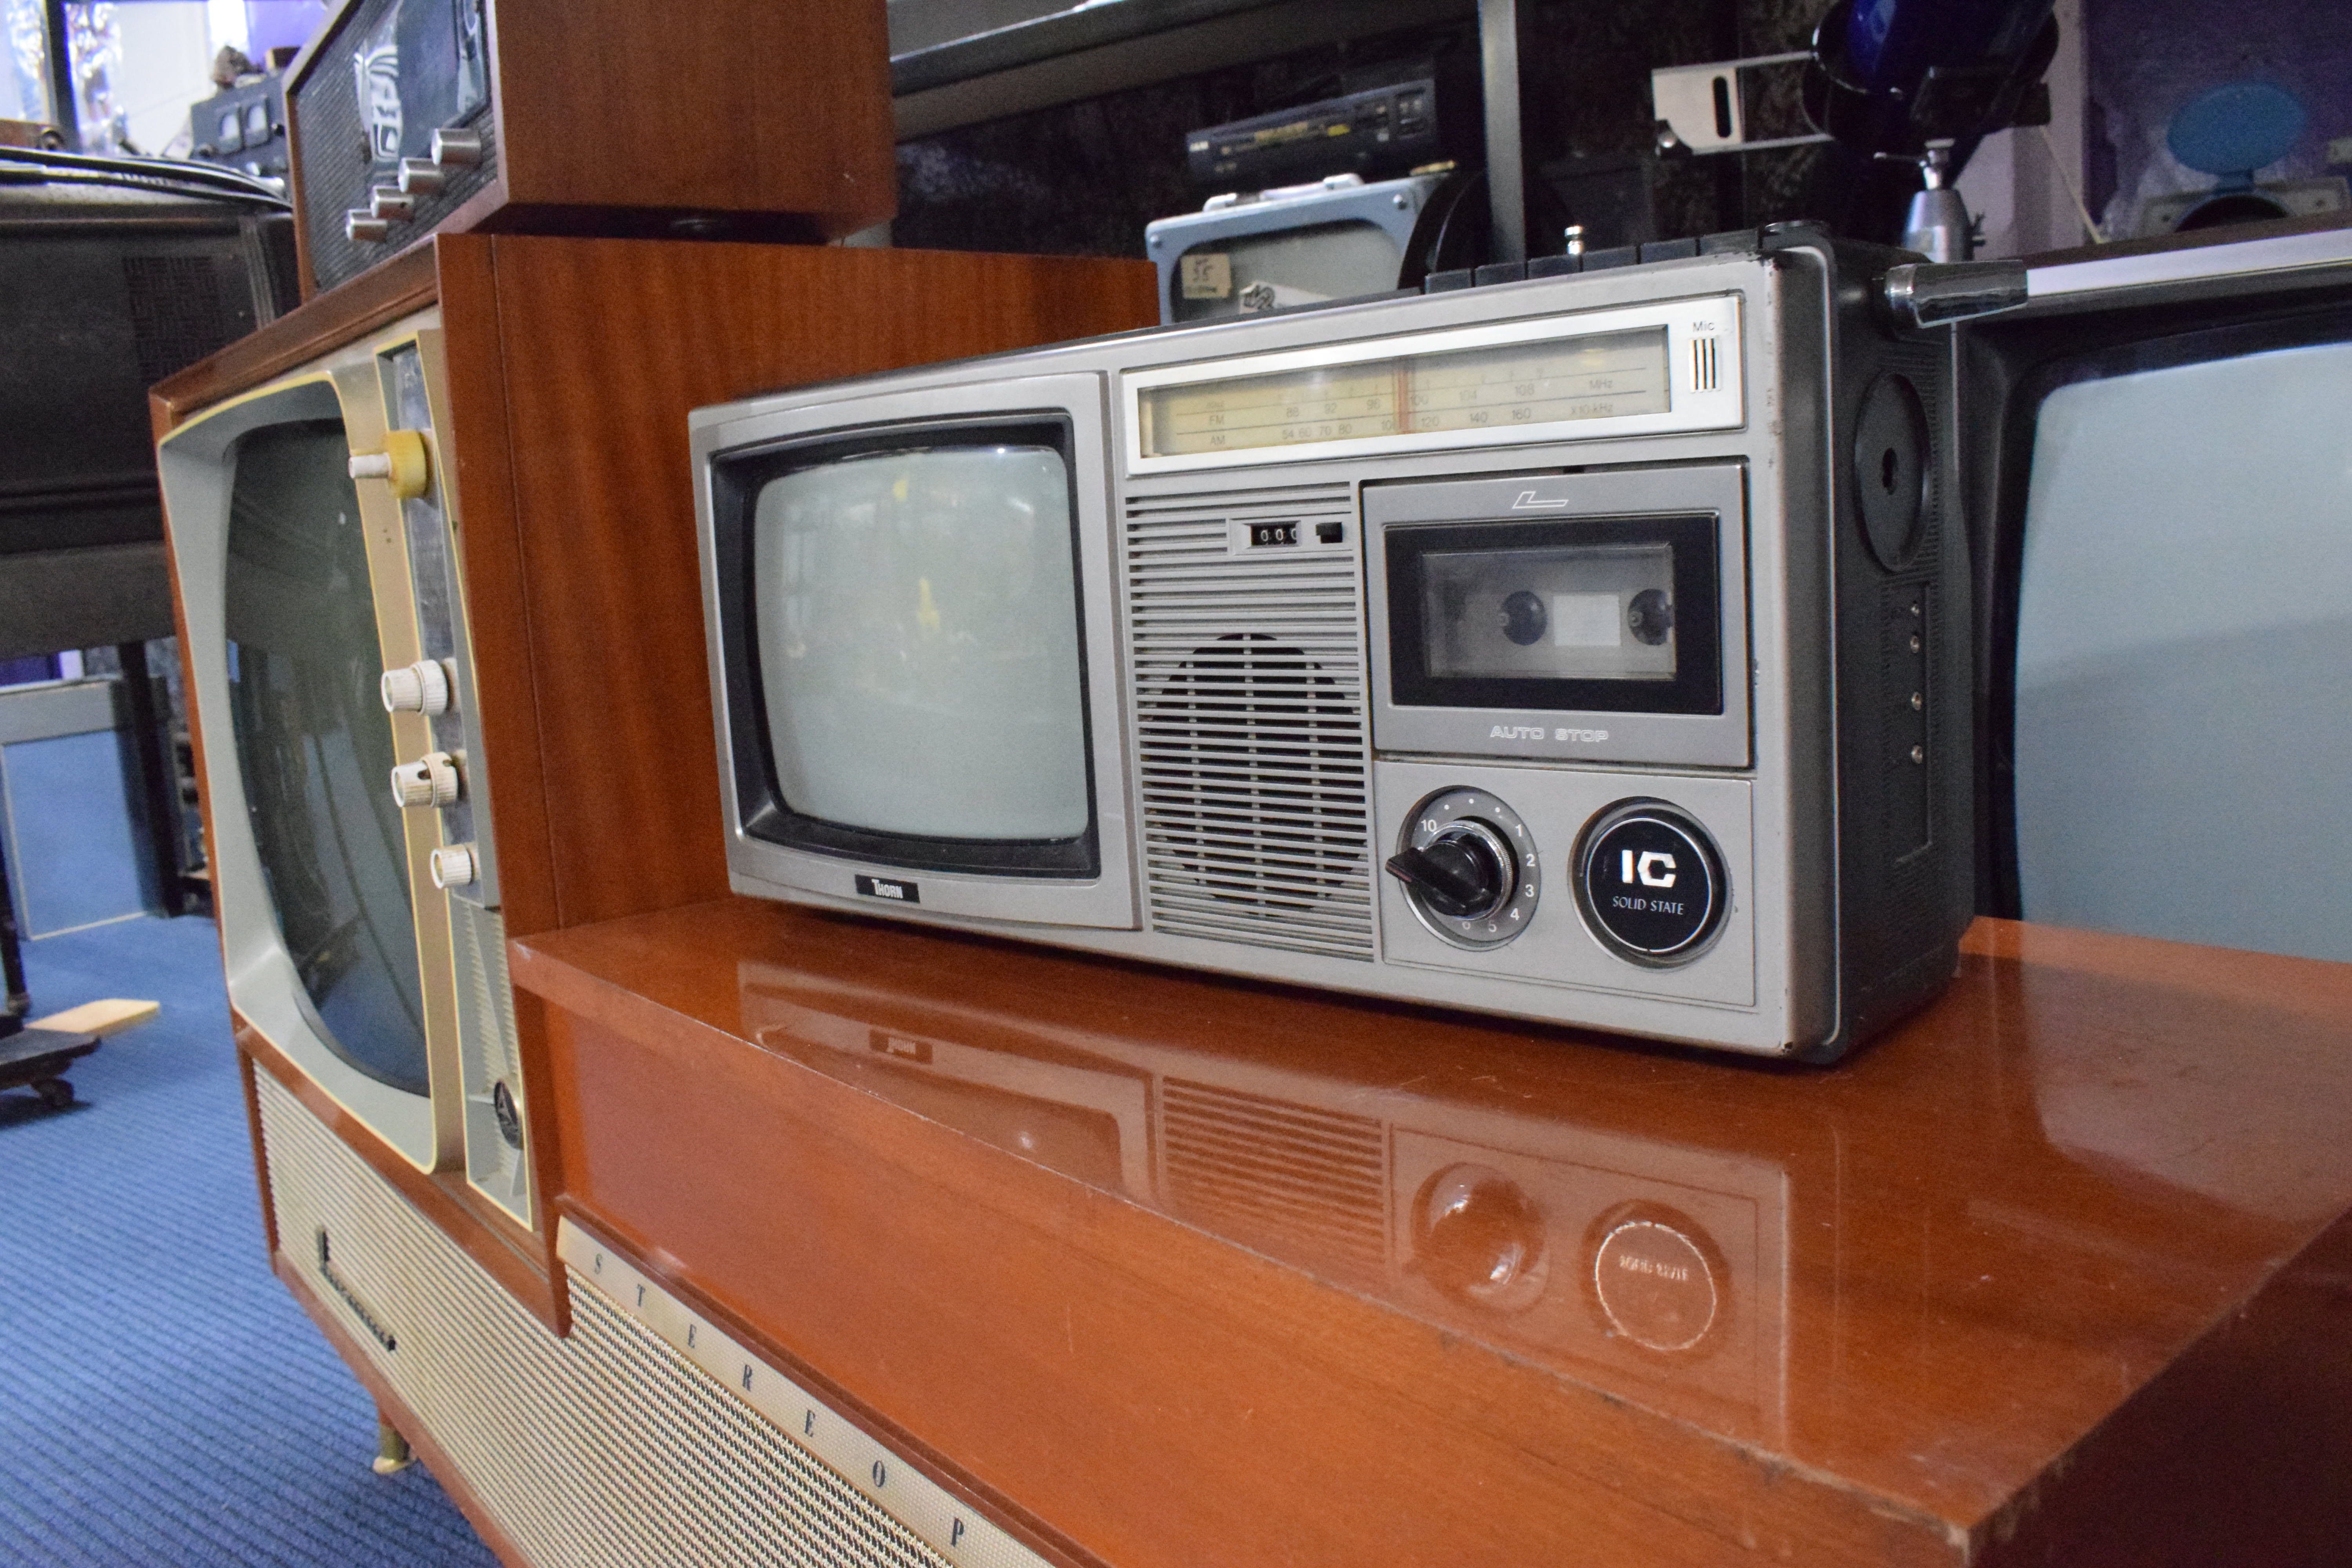 Foxton's Coronation Hall is home to a range of classic TV's from early models which dominated the living room to smaller, portable models.